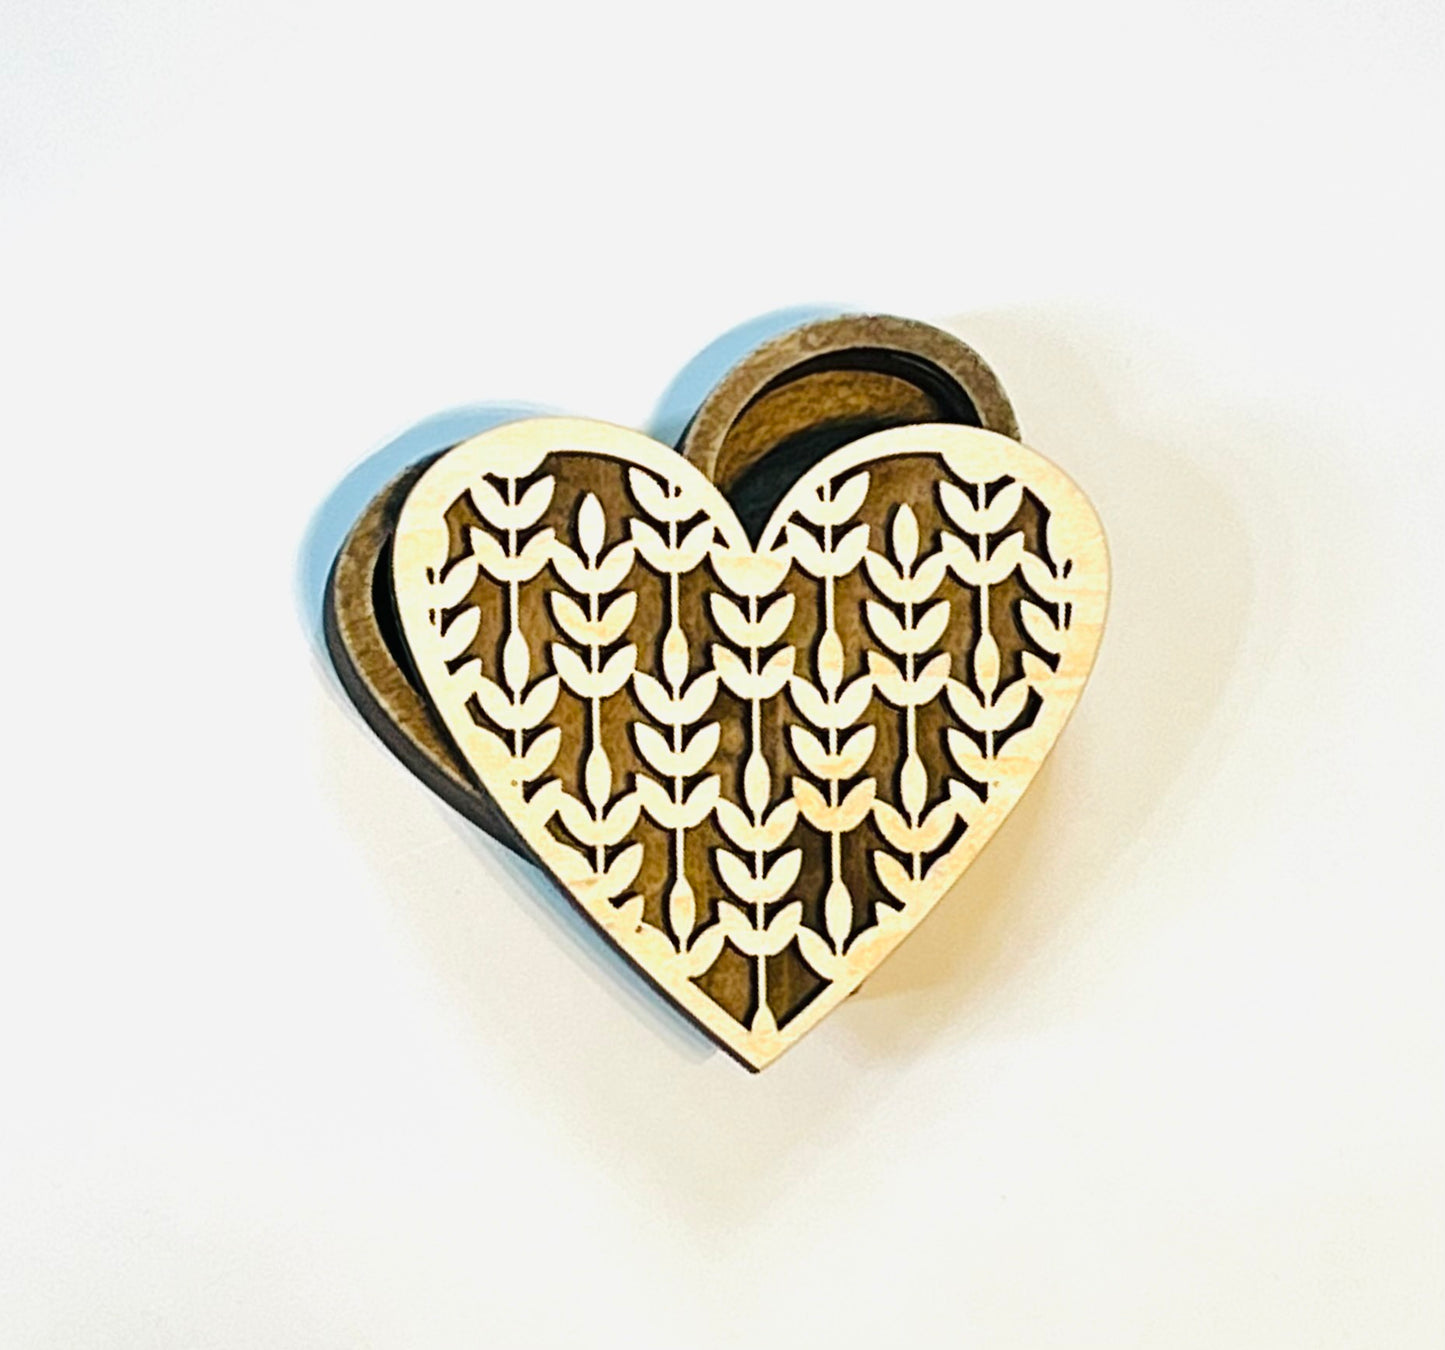 Heart Shaped Trinket Boxes with Lids